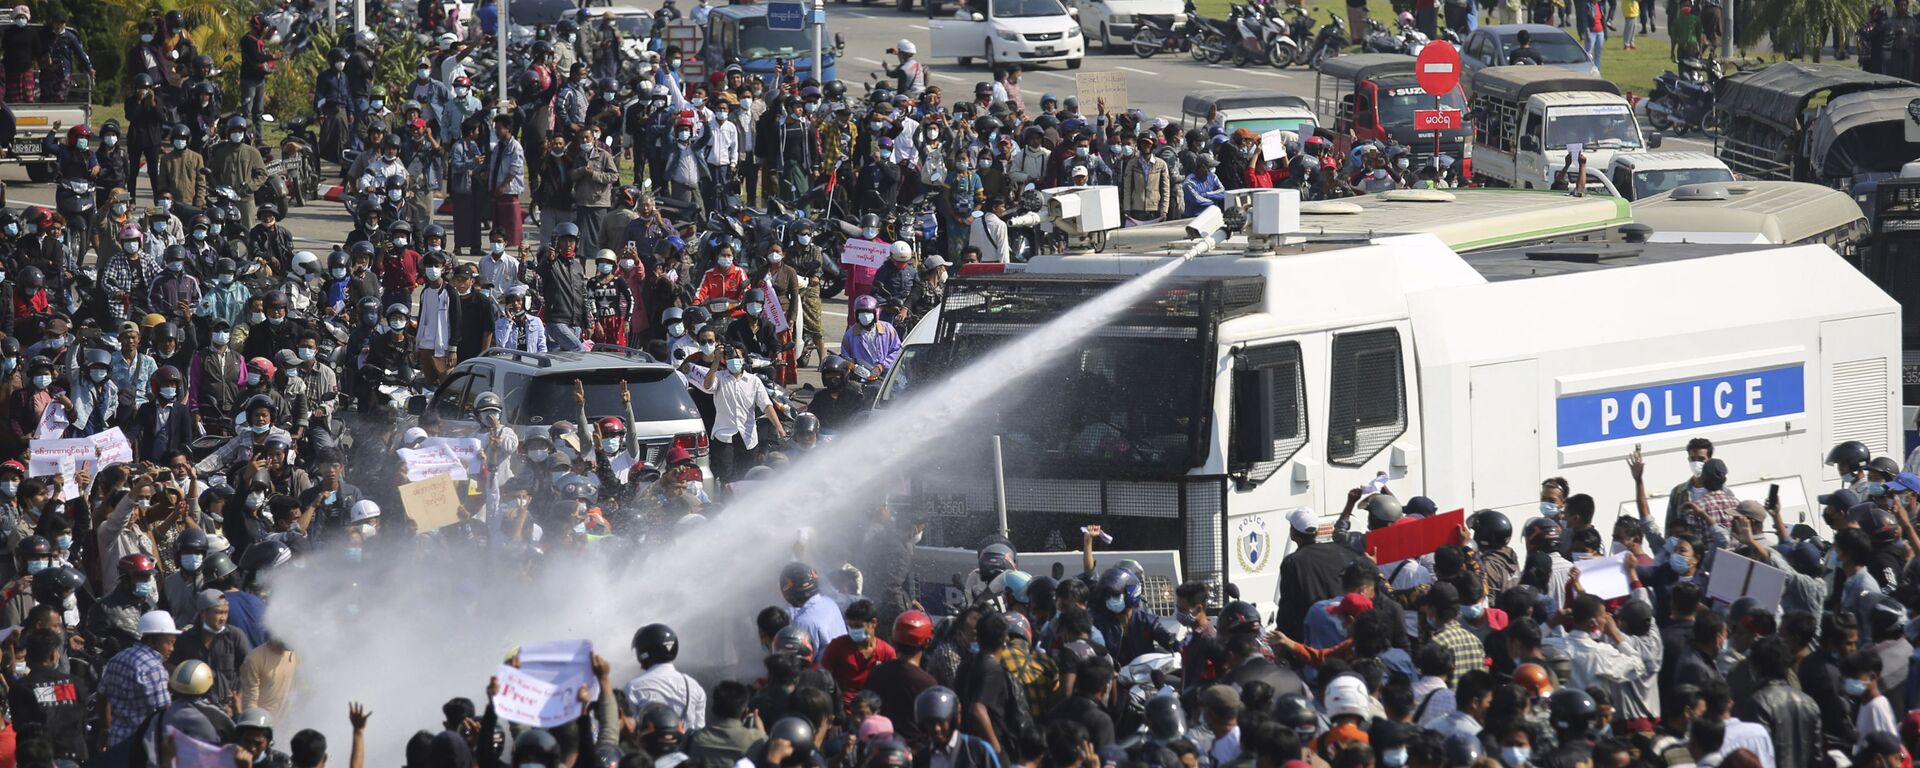 A police truck sprays water to a crowd of protesters in Naypyitaw, Myanmar on Monday, Feb. 8, 2021.  - Sputnik International, 1920, 22.02.2021